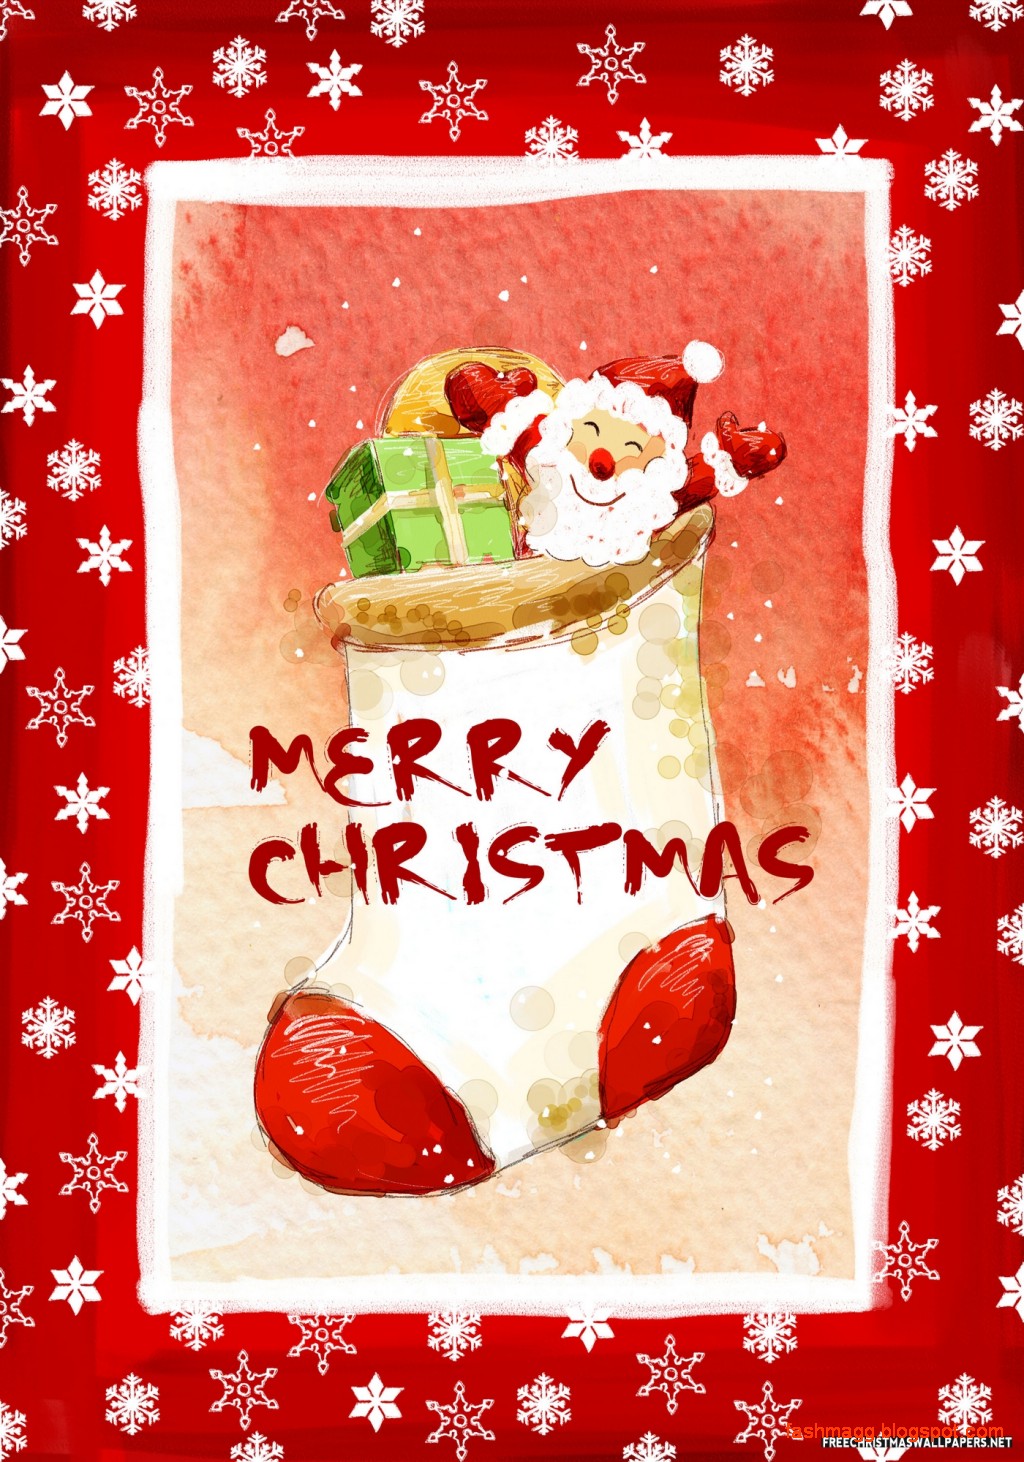 Merry Christmas X-Mass Greeting Cards Pictures-Christmas Cards Ideas-Gifts-Images-Photos12